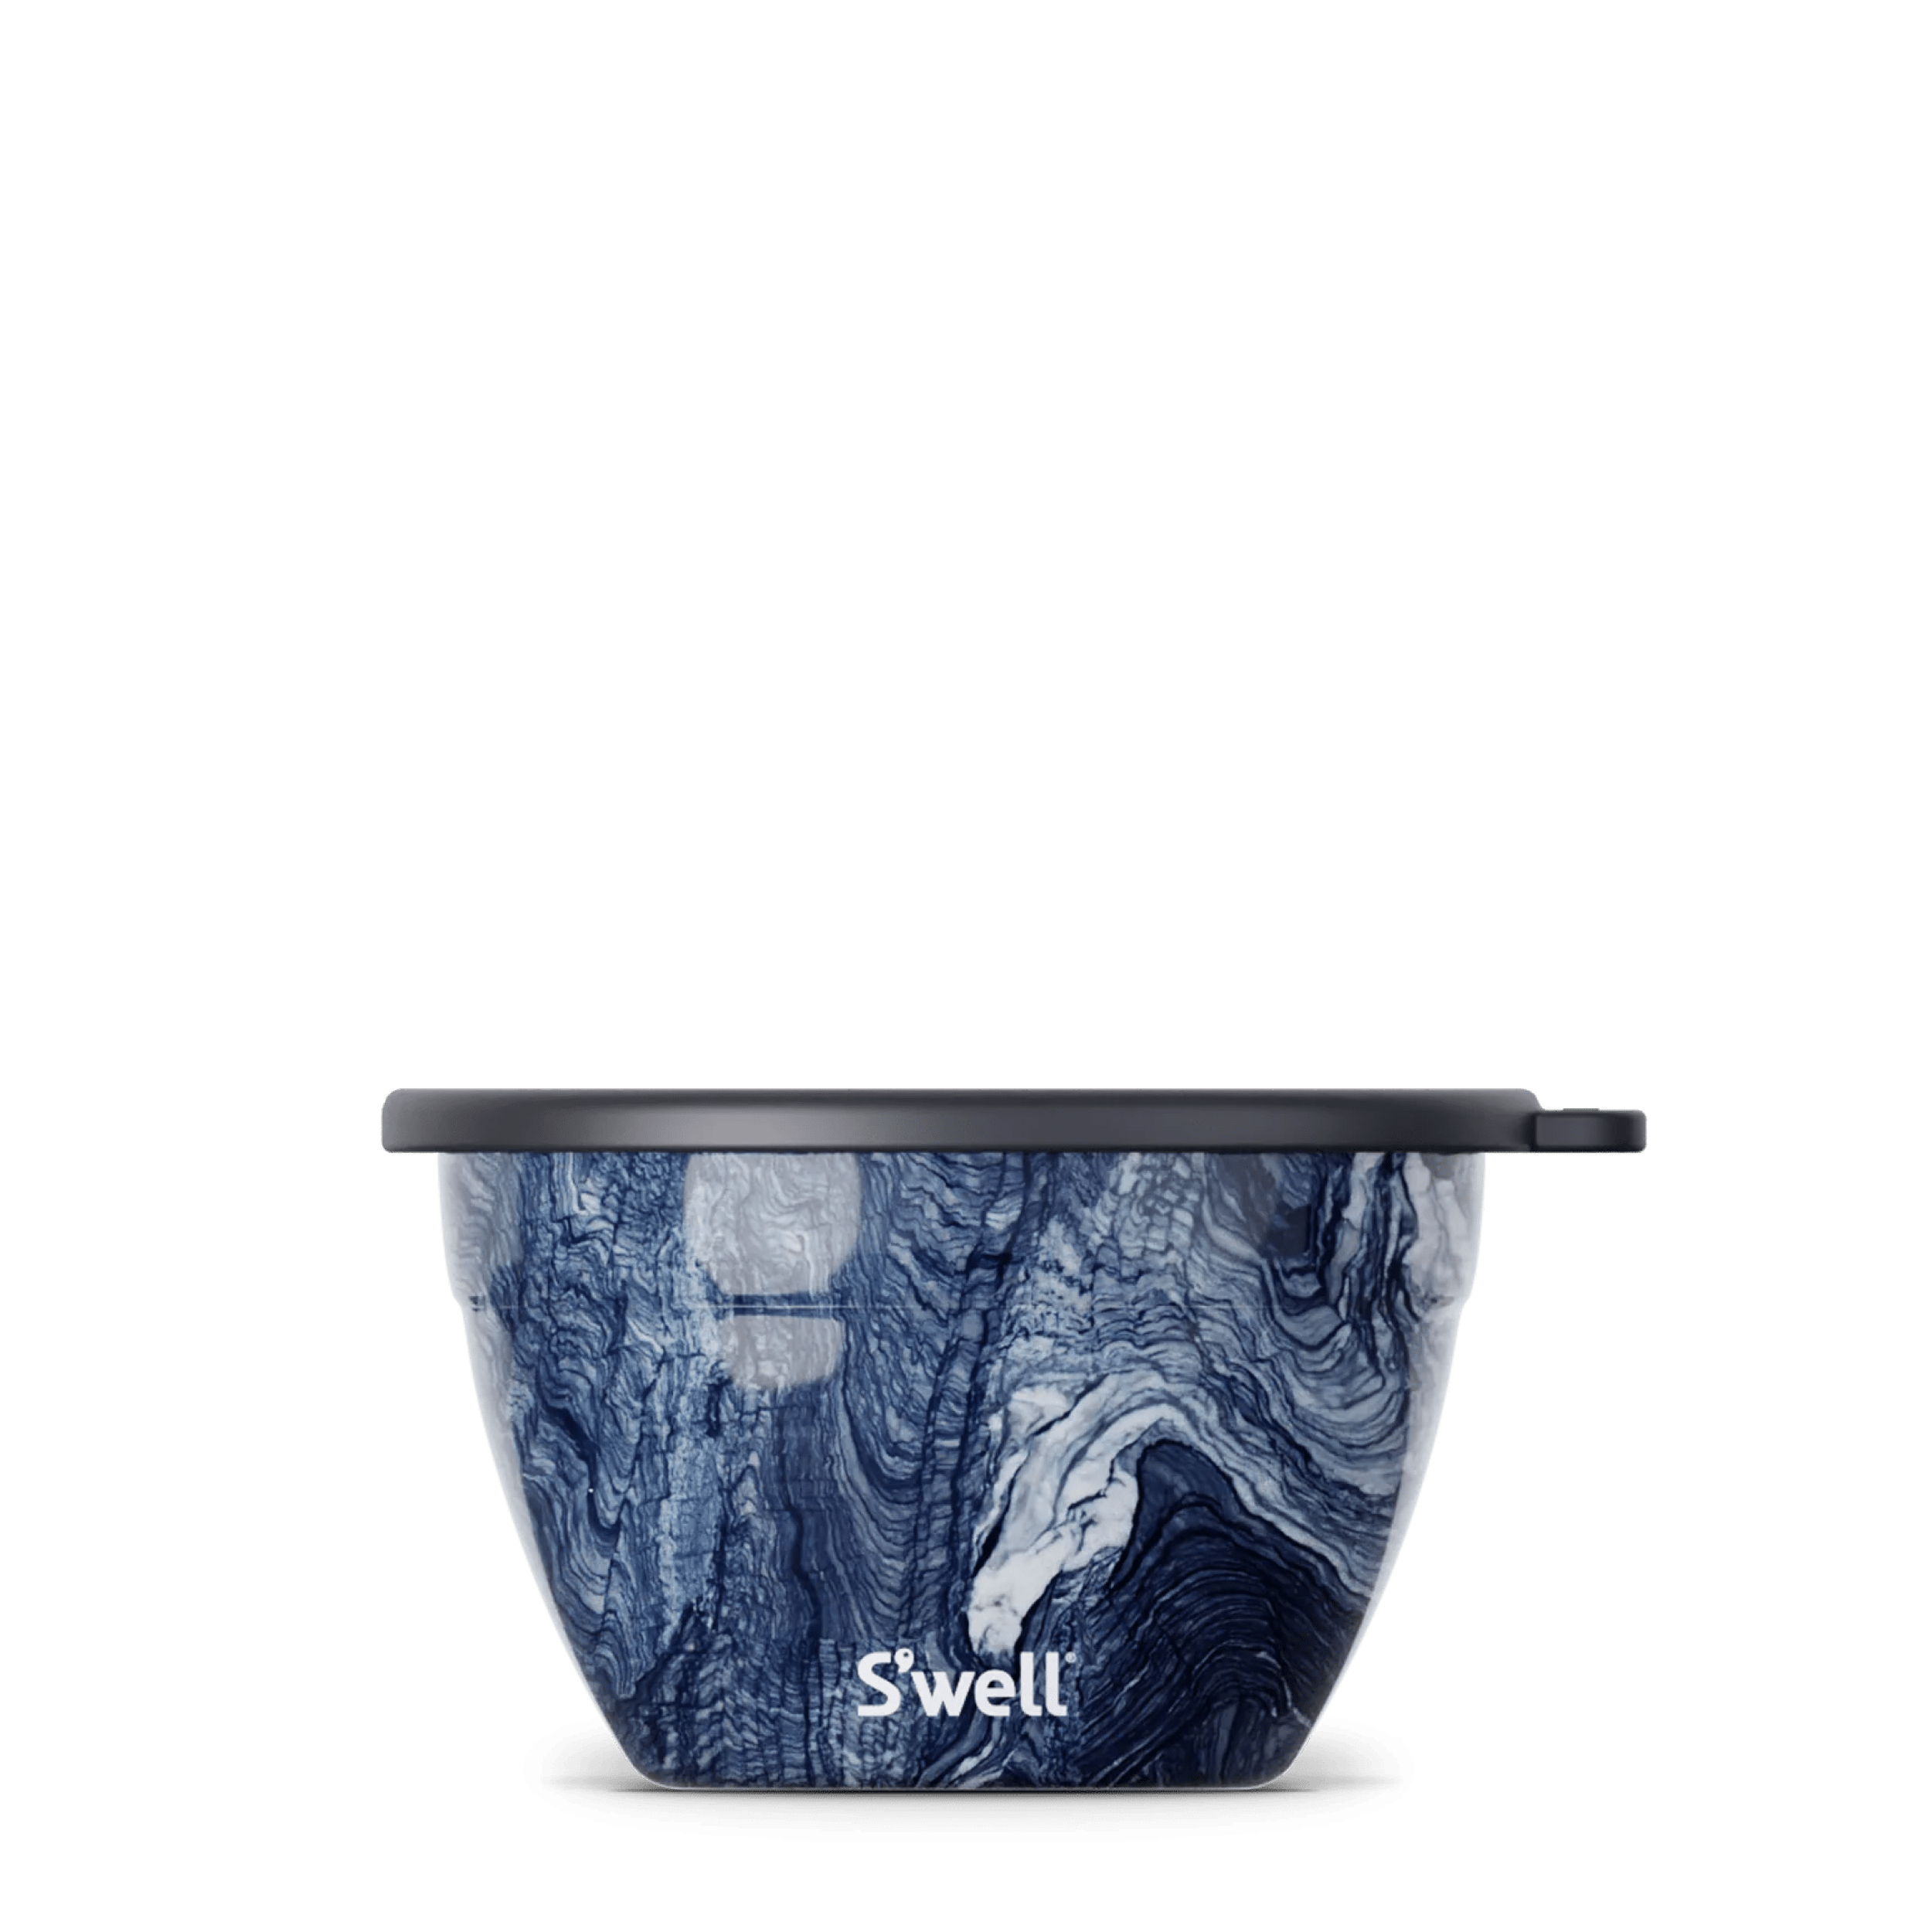 S'well Azurite Marble Bowl | 10oz | Blue | Eco-Friendly, Reusable Bowl